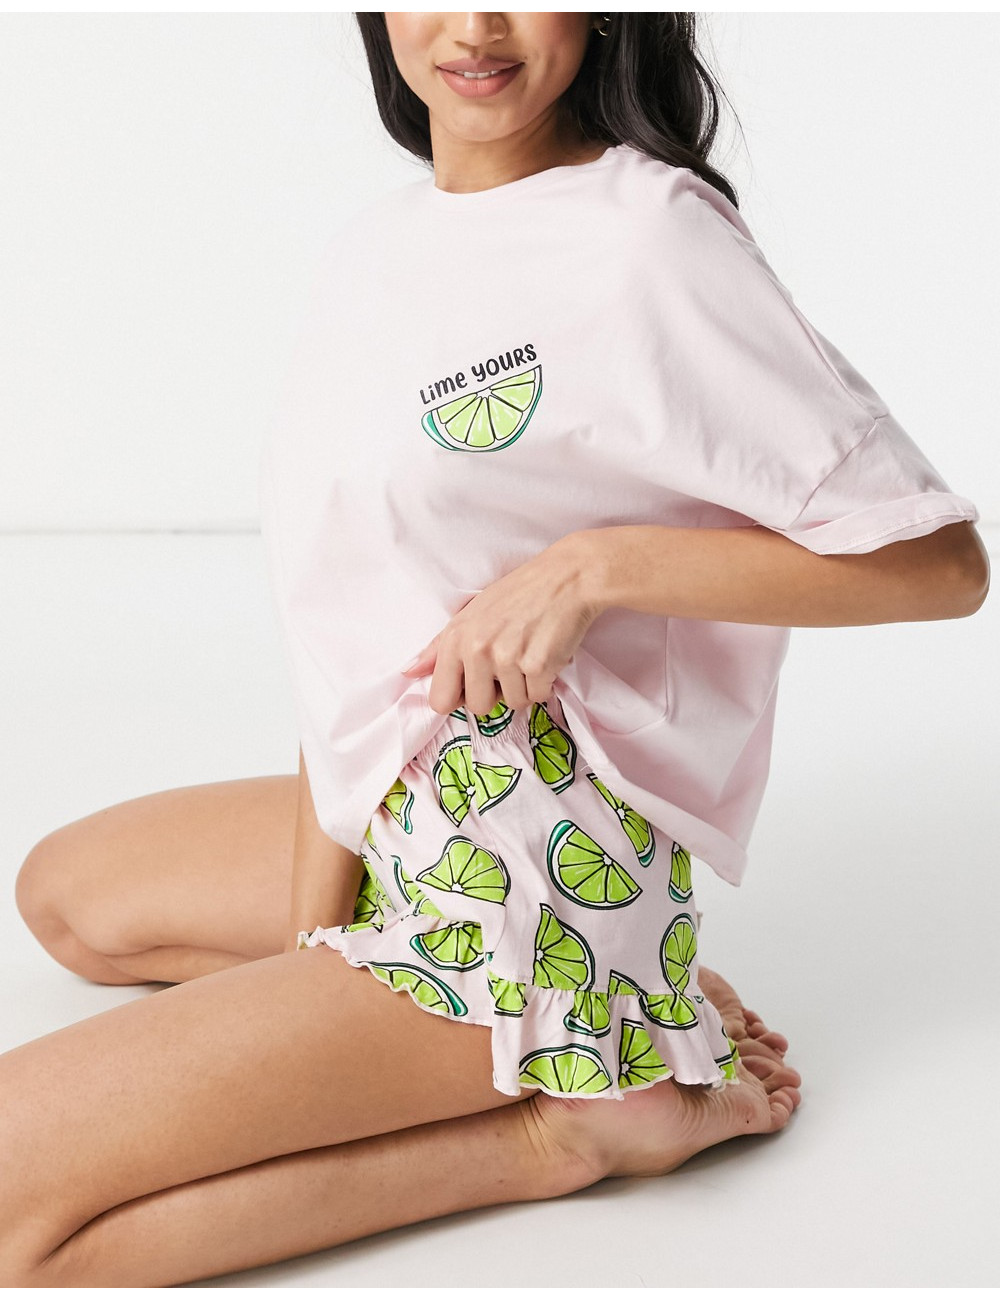 ASOS DESIGN lime yours tee...